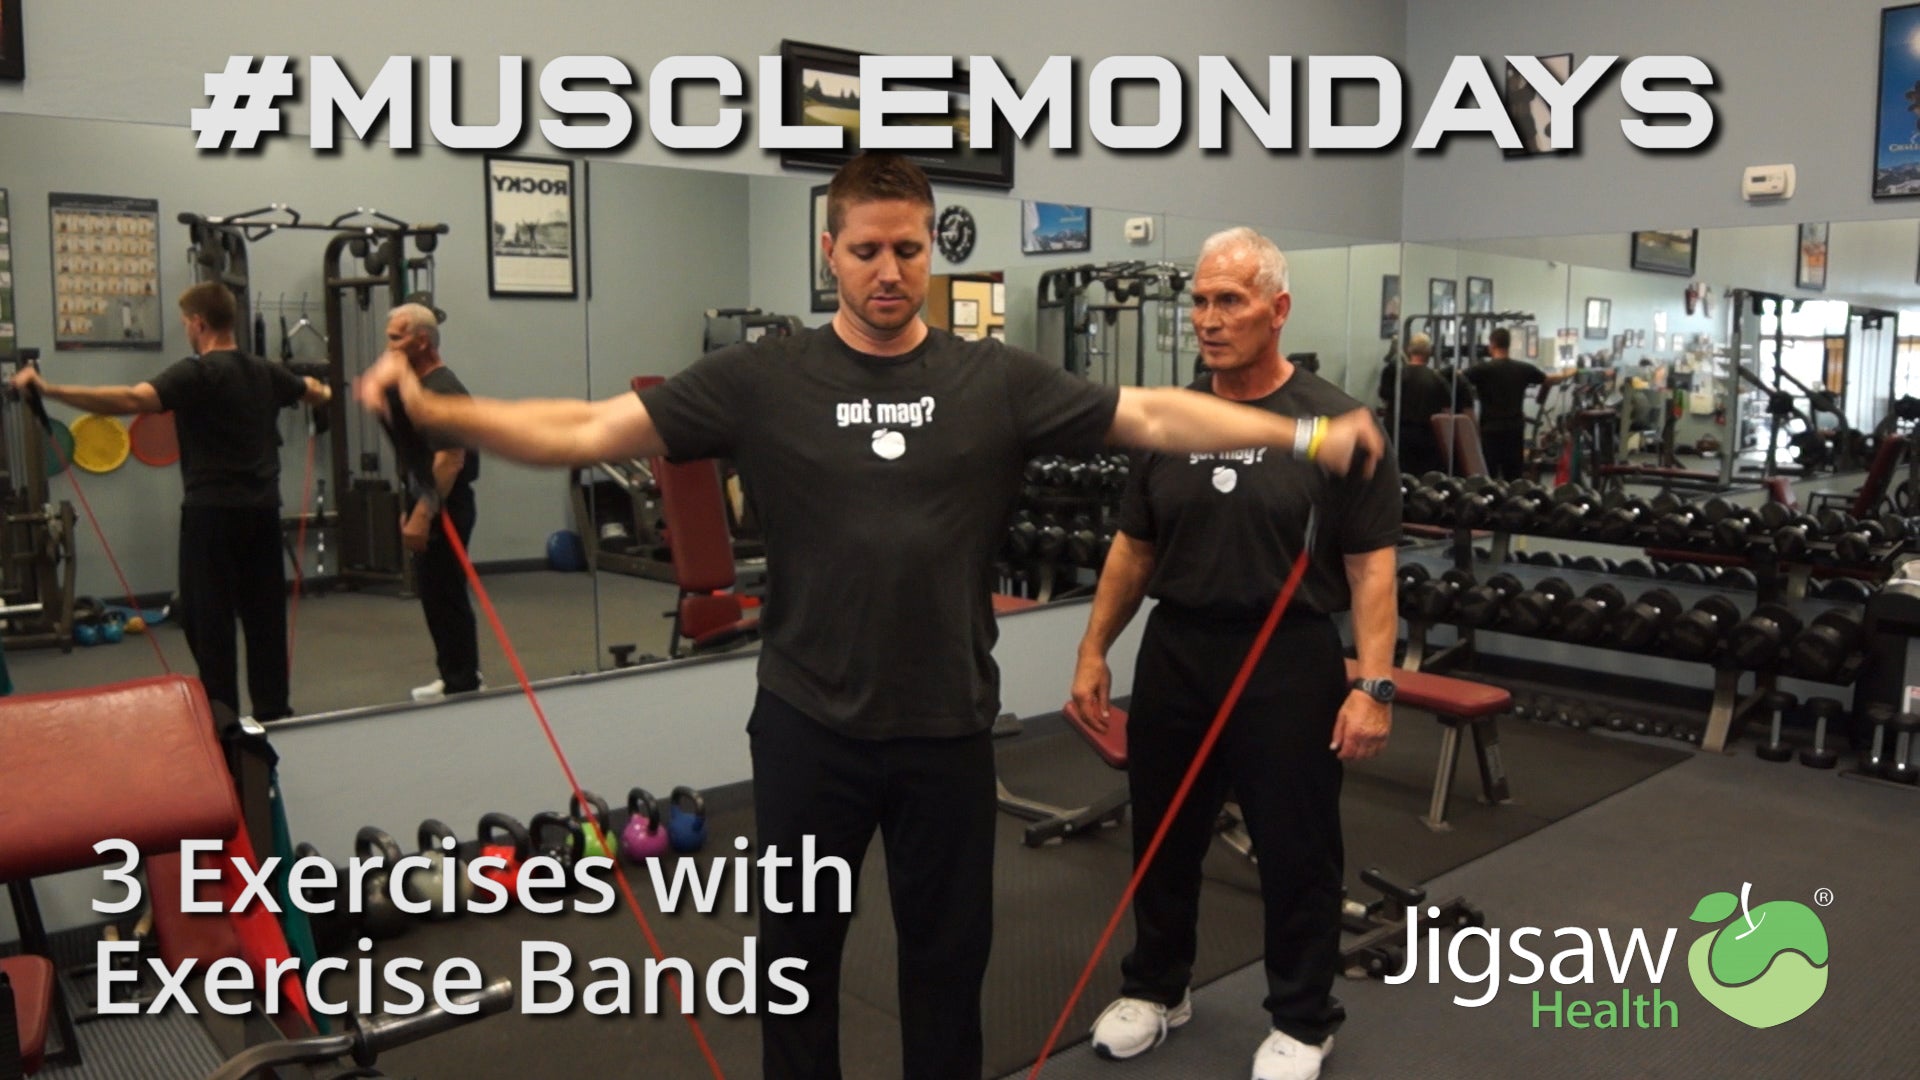 3 Exercises with Exercise Bands | #MuscleMonday